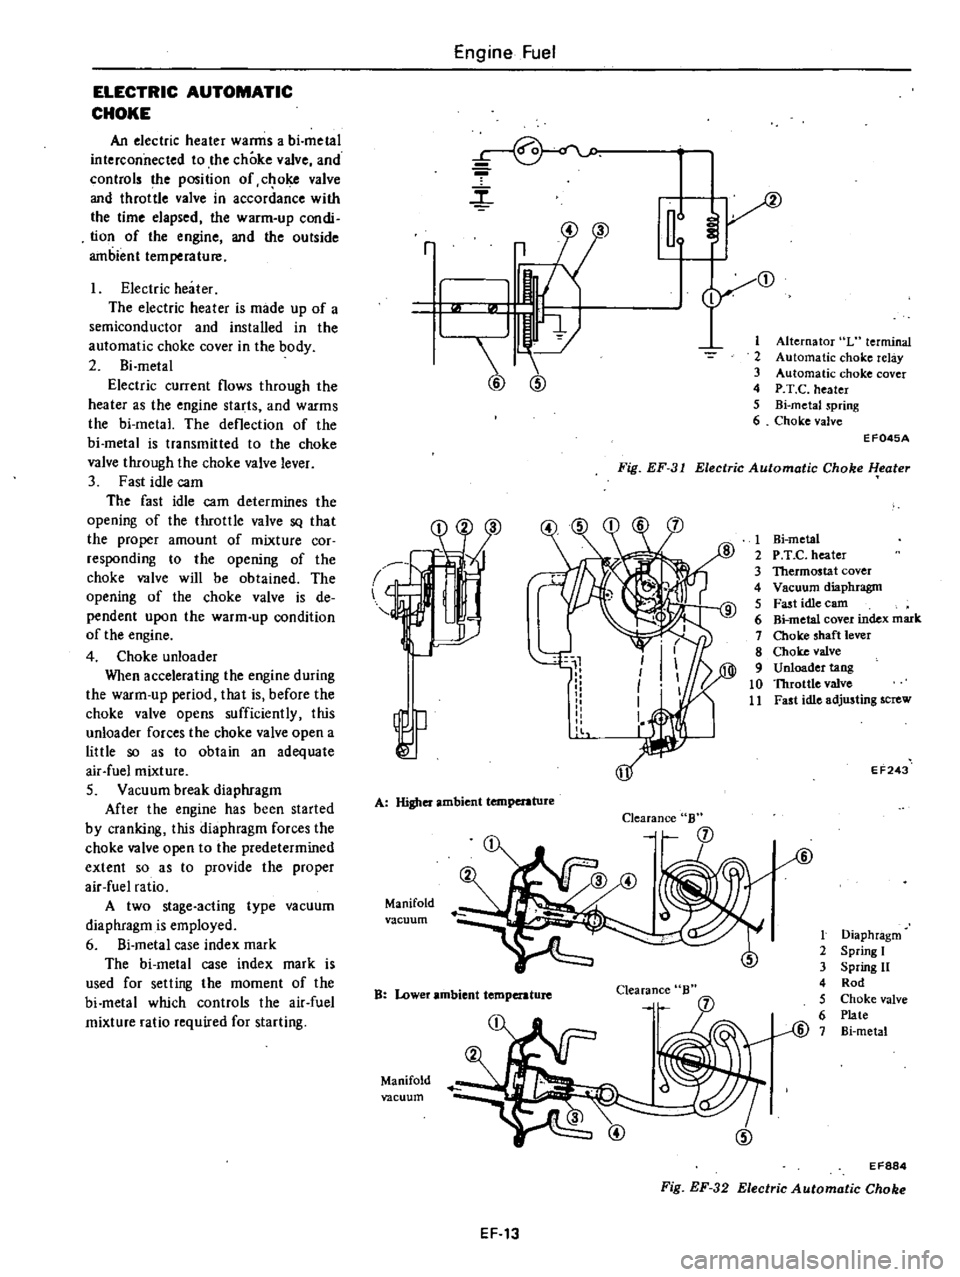 DATSUN 210 1979  Service Manual 
ELECTRIC 
AUTOMATIC

CHOKE

An 
electric 
heater 
warms 
a 
bi 
metal

interconnected 
to 
the 
choke 
valve 
and

controls 
the

position 
of 
c 
oke

valve

and 
throttle 
valve 
in 
accordance

wi